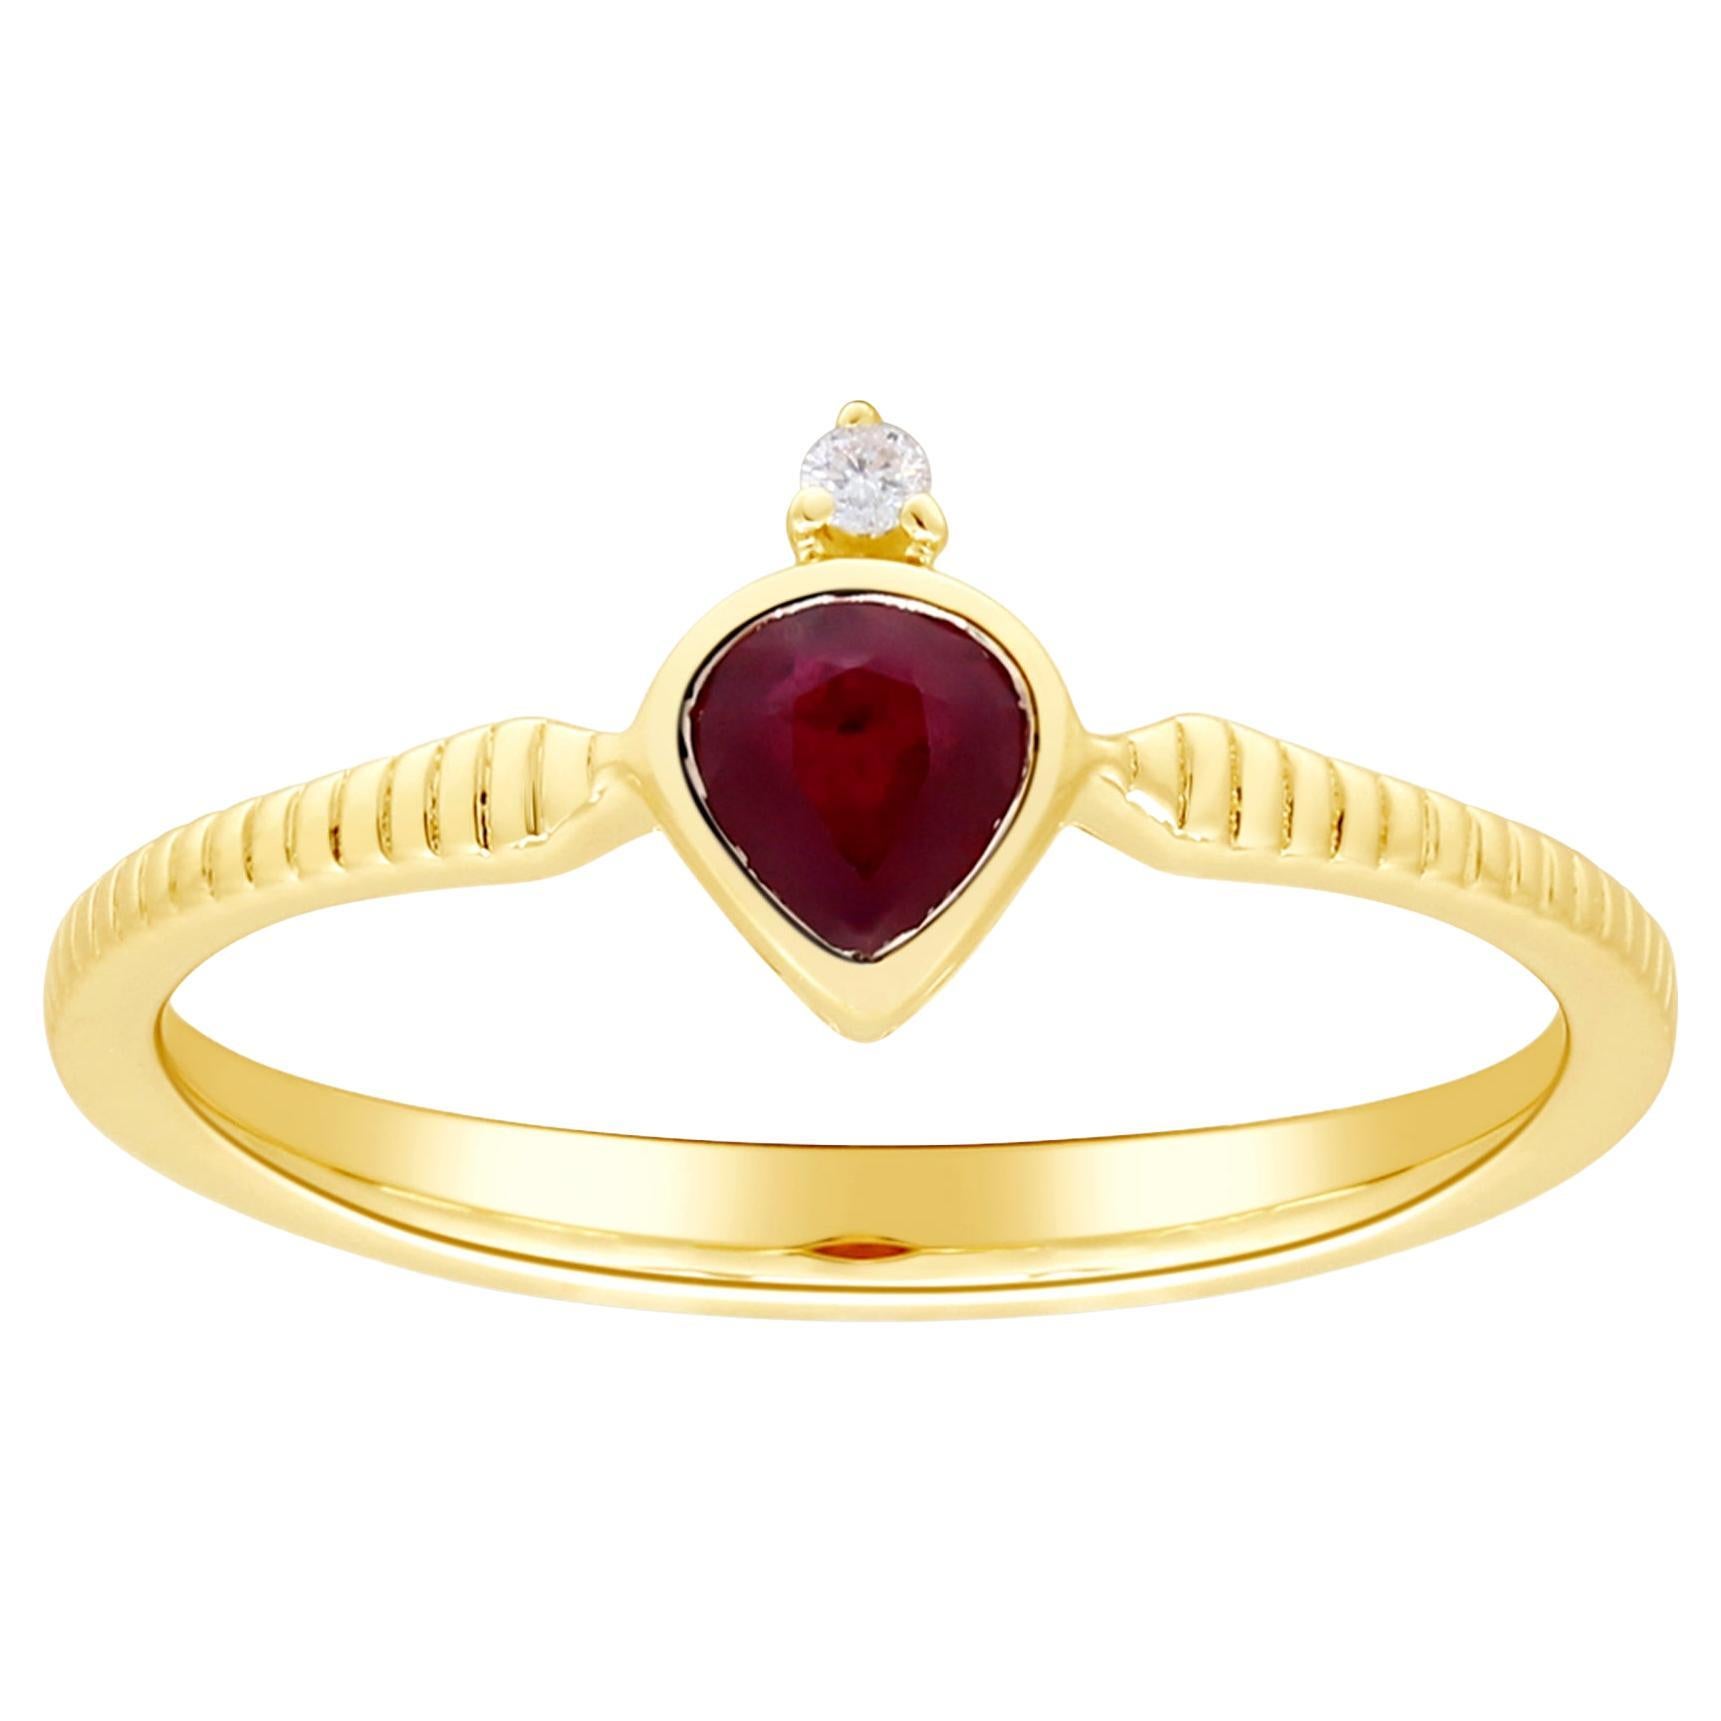 0.36 Carat Pear-Cut Ruby with Diamond Accents 14K Yellow Gold Ring For Sale